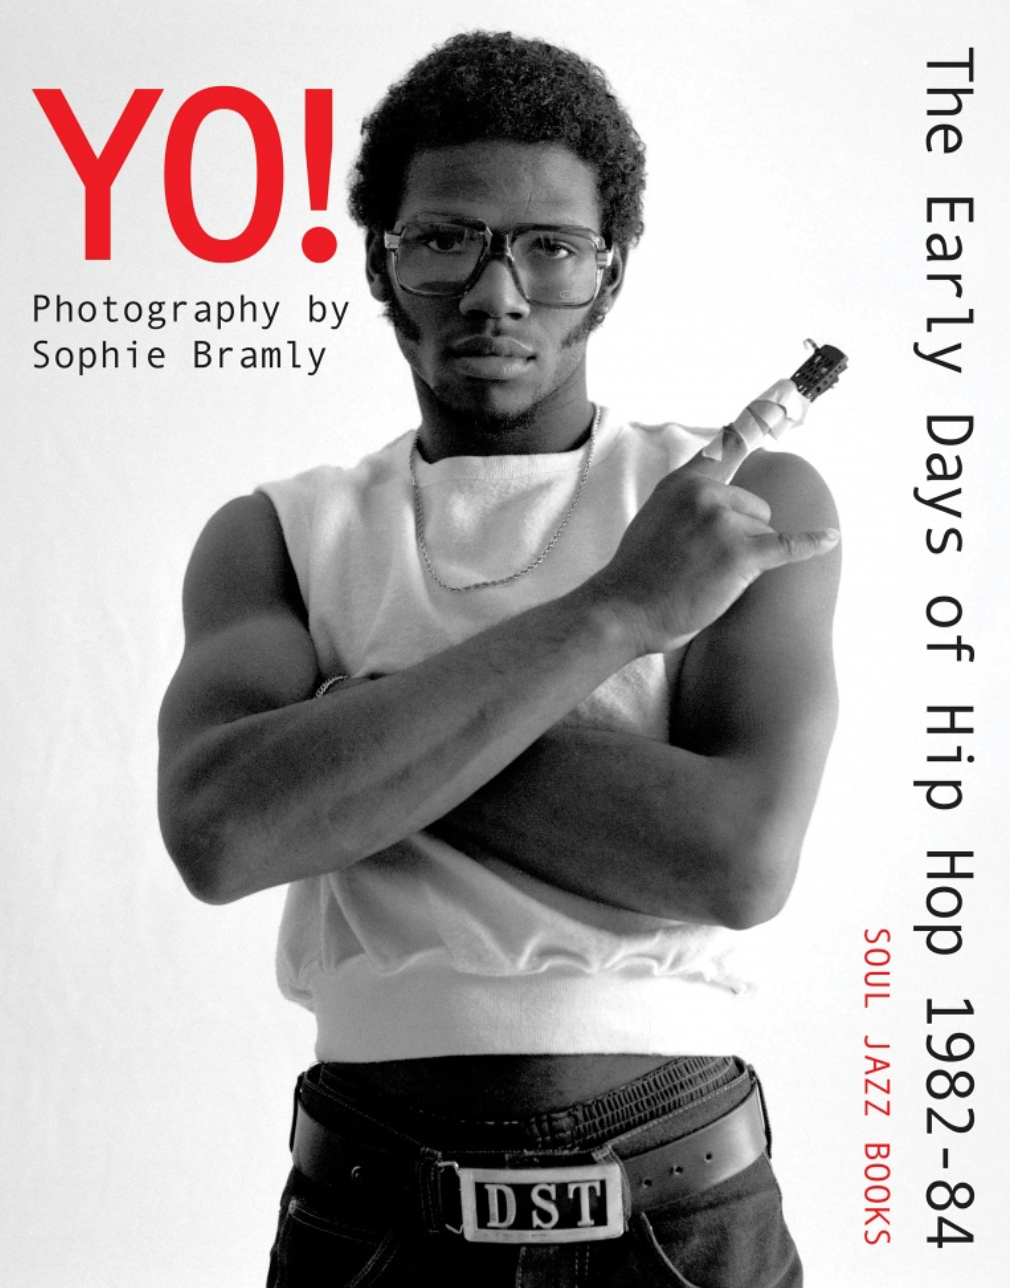 'Yo! The Early Days of Hip-Hop 1982-84: Photography by Sophie Bramly' Book